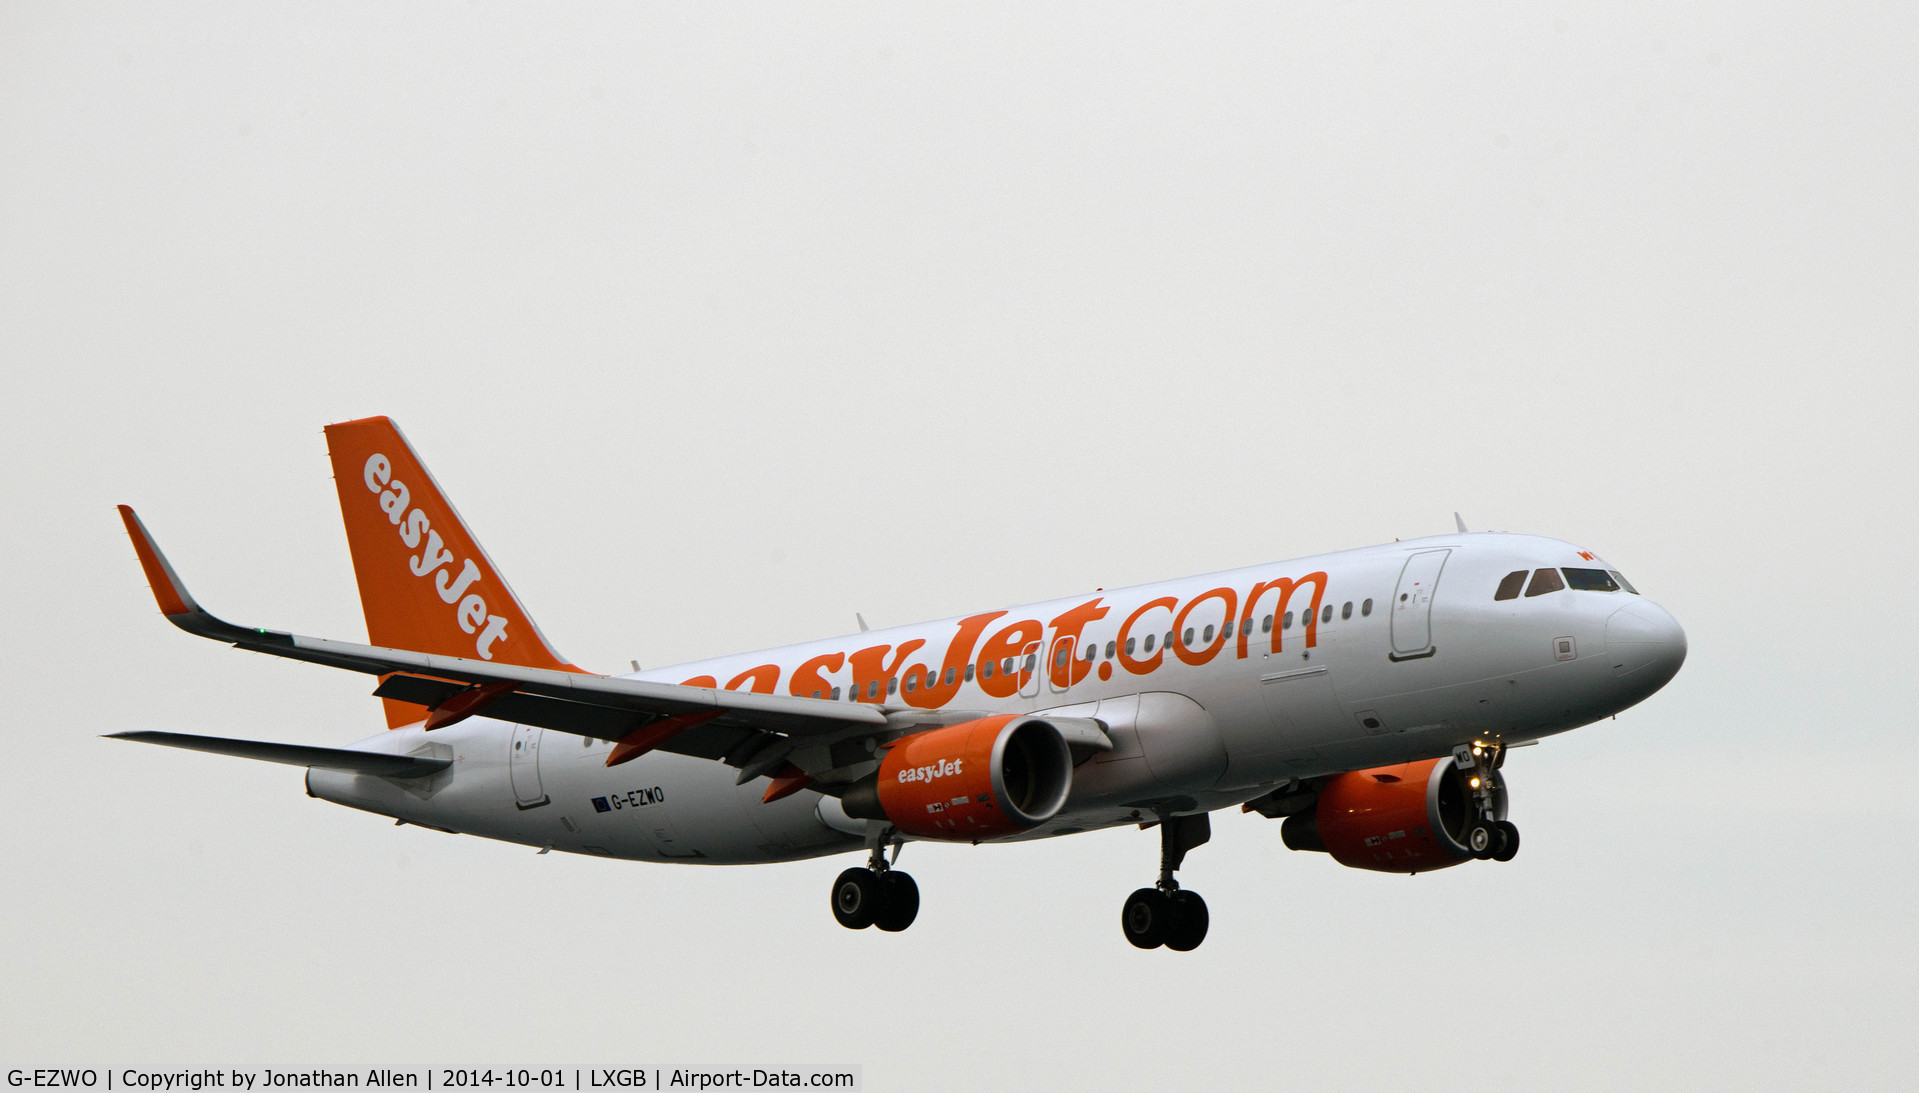 G-EZWO, 2013 Airbus A320-214 C/N 5785, On approach to Gibraltar with EZY8901 from Gatwick.